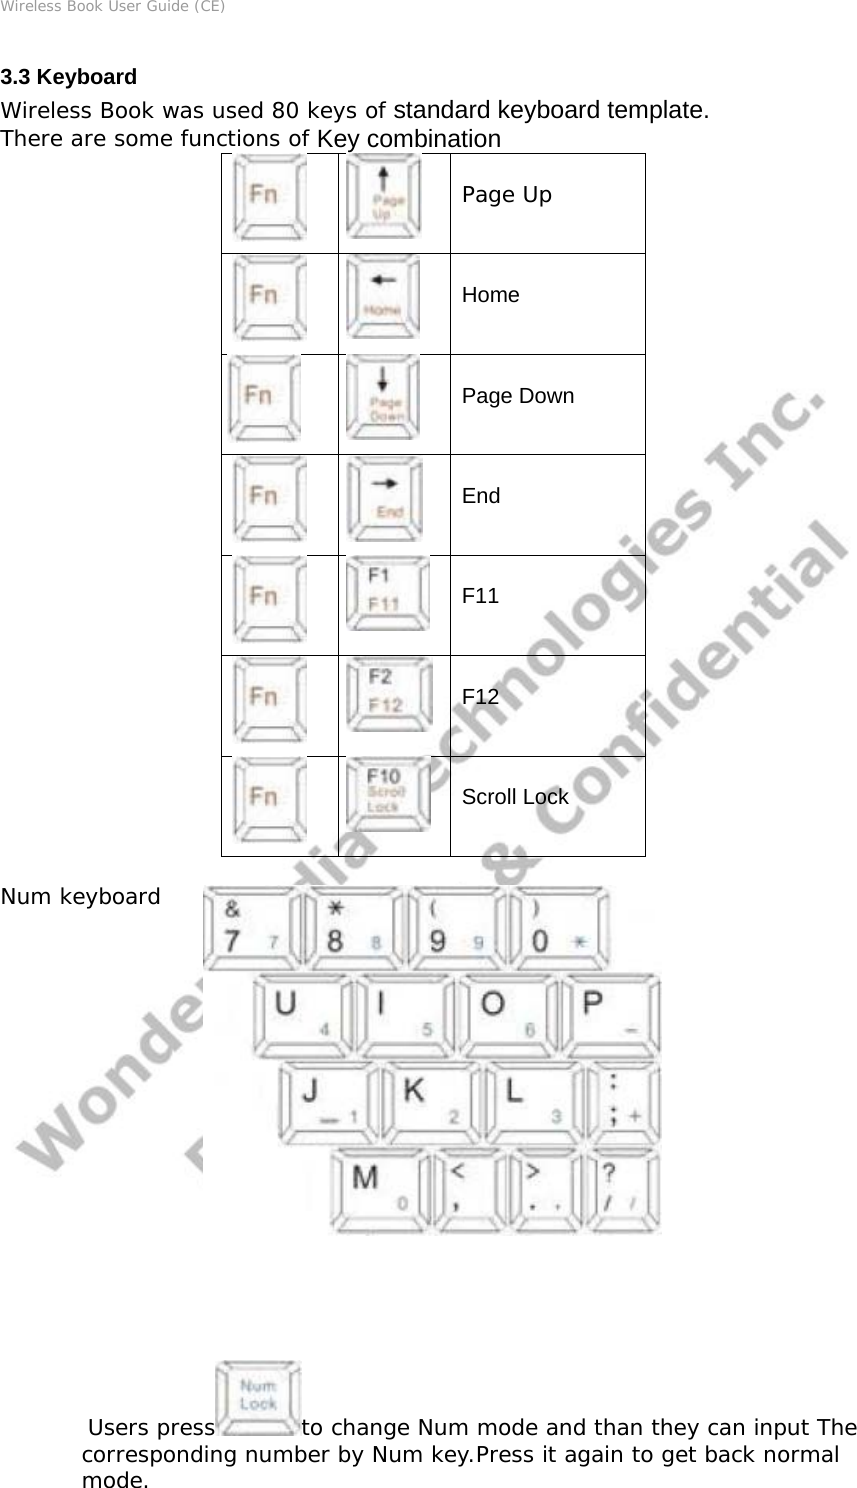 Wireless Book User Guide (CE) 3.3 Keyboard Wireless Book was used 80 keys of standard keyboard template. There are some functions of Key combination   Page Up Home Page Down End  F11  F12  Scroll Lock  Num keyboard                  Users press to change Num mode and than they can input The corresponding number by Num key.Press it again to get back normal mode.  